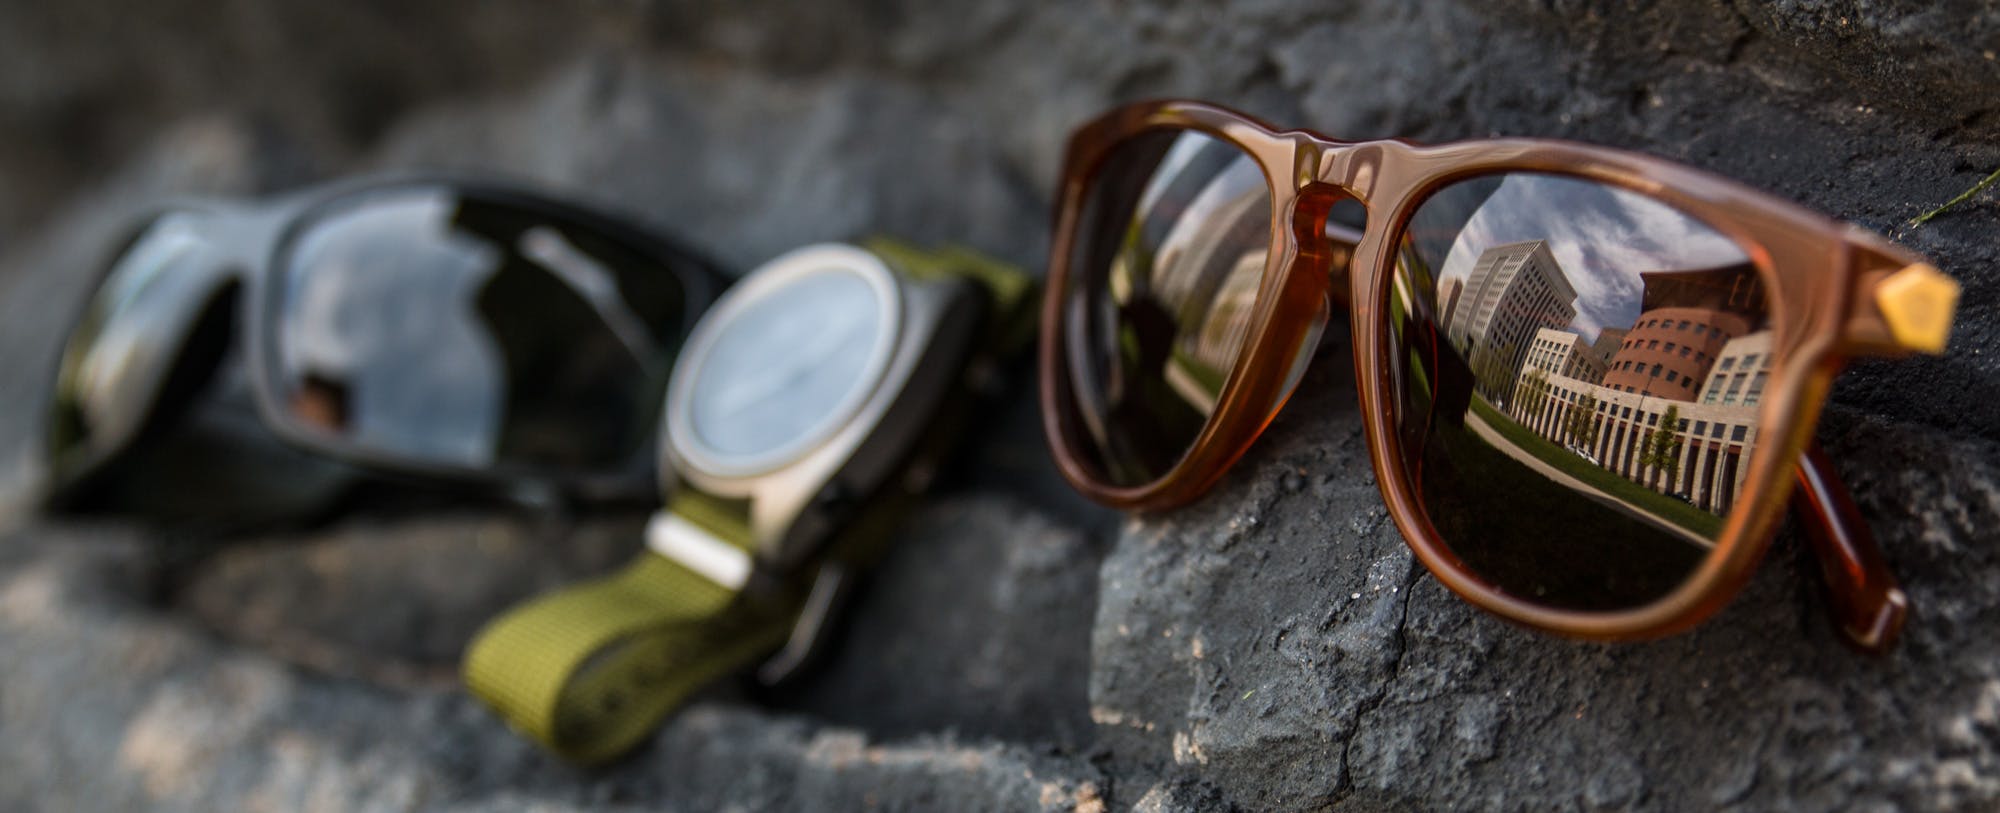 Thunderstruck: Electric Watch and Sunglasses Review